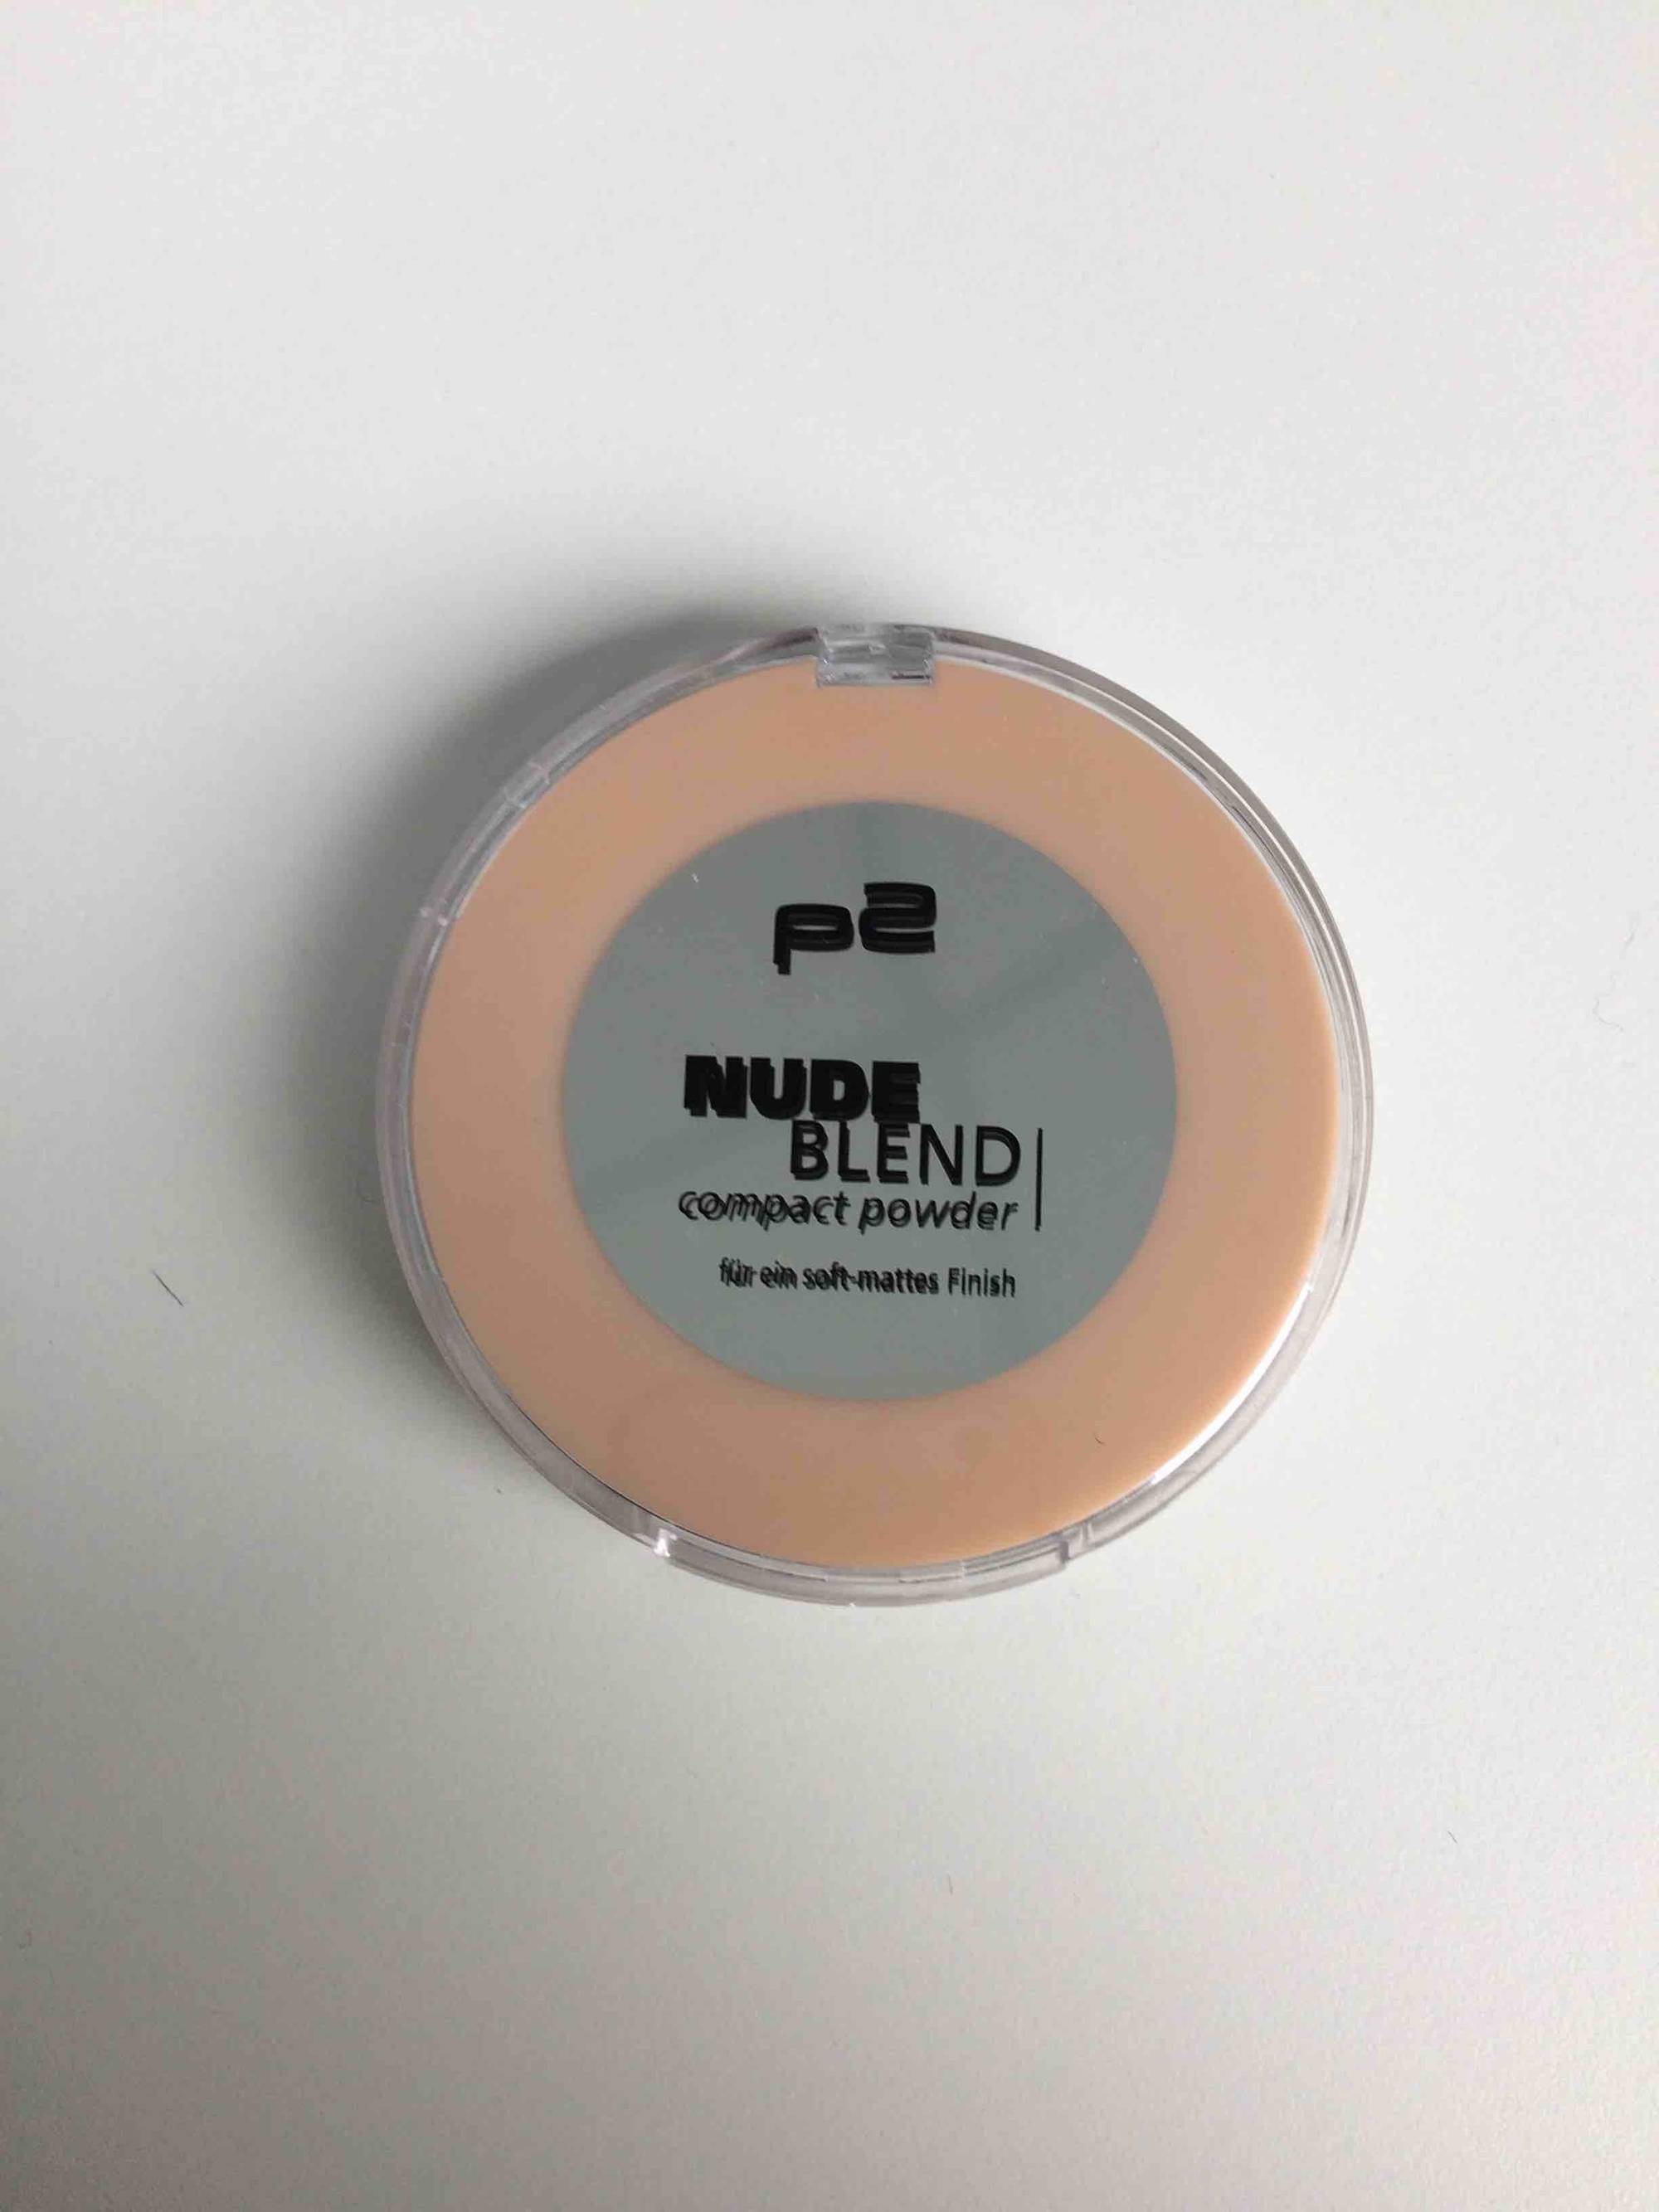 P2 - Nude Blend - Compact powder